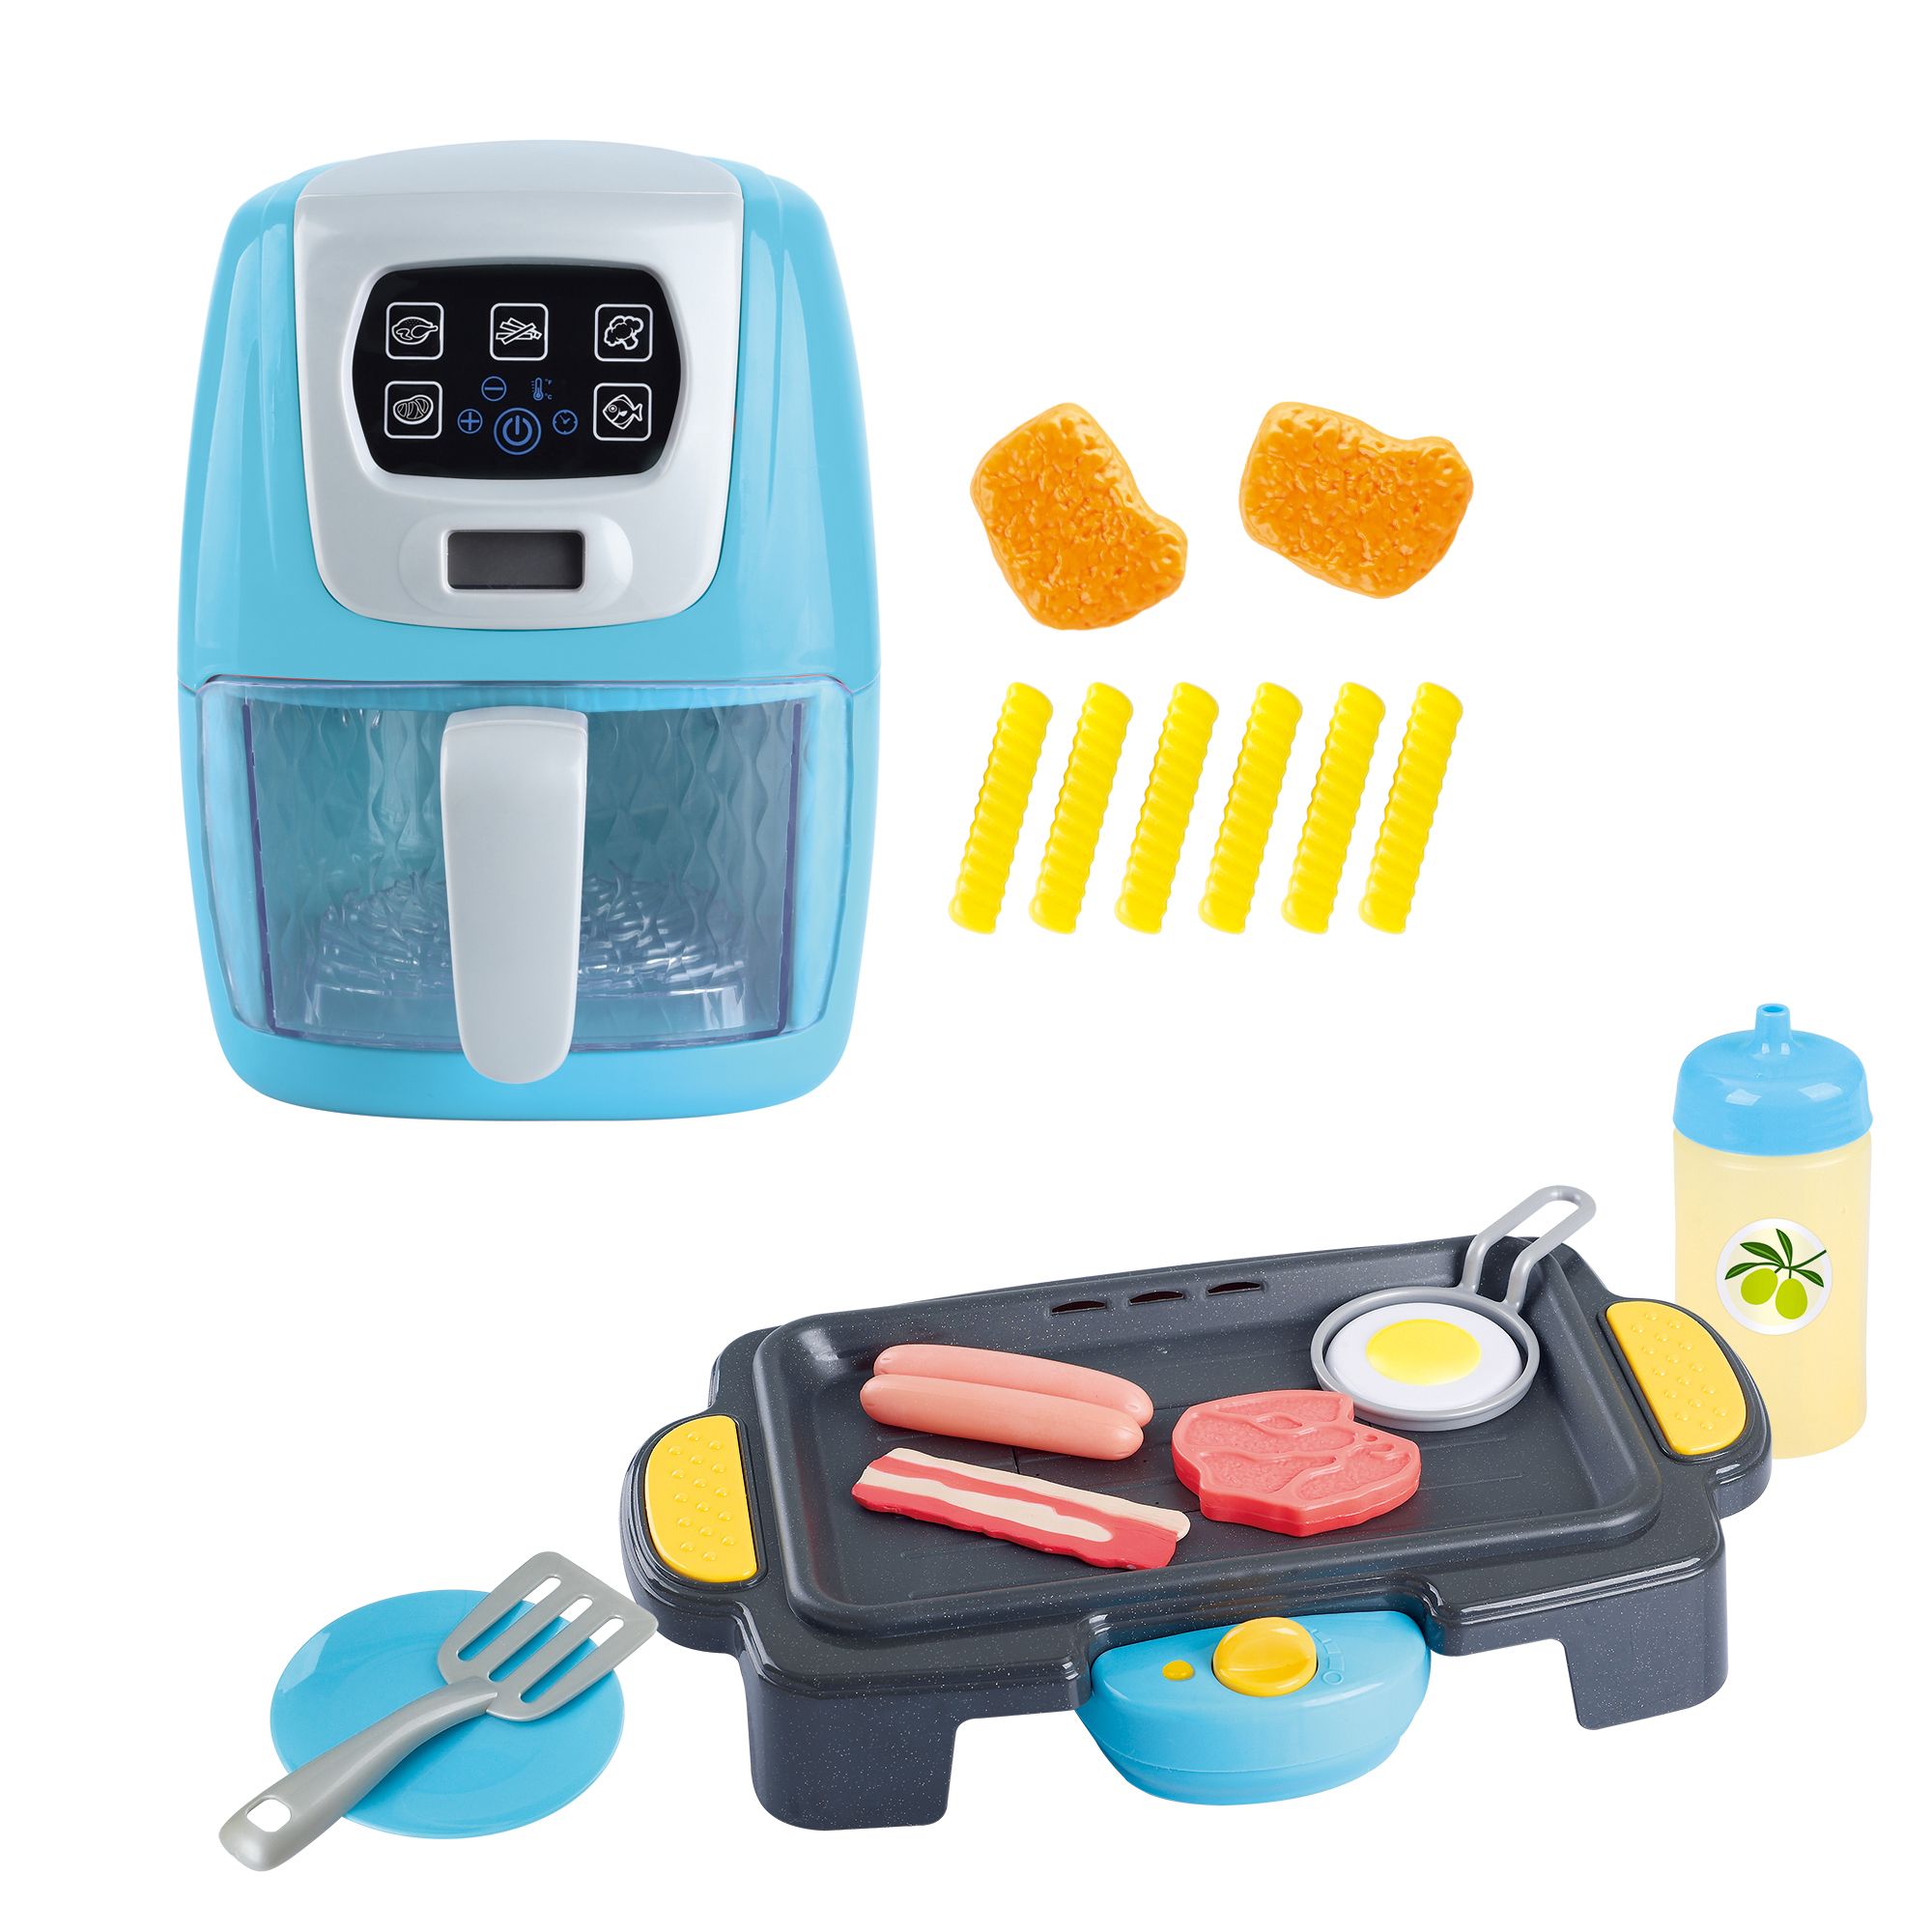 Kids Air Fryer Set Color Changing Little Chef Pretend Play Grill Playset  Pretend Play Kitchen Accessories